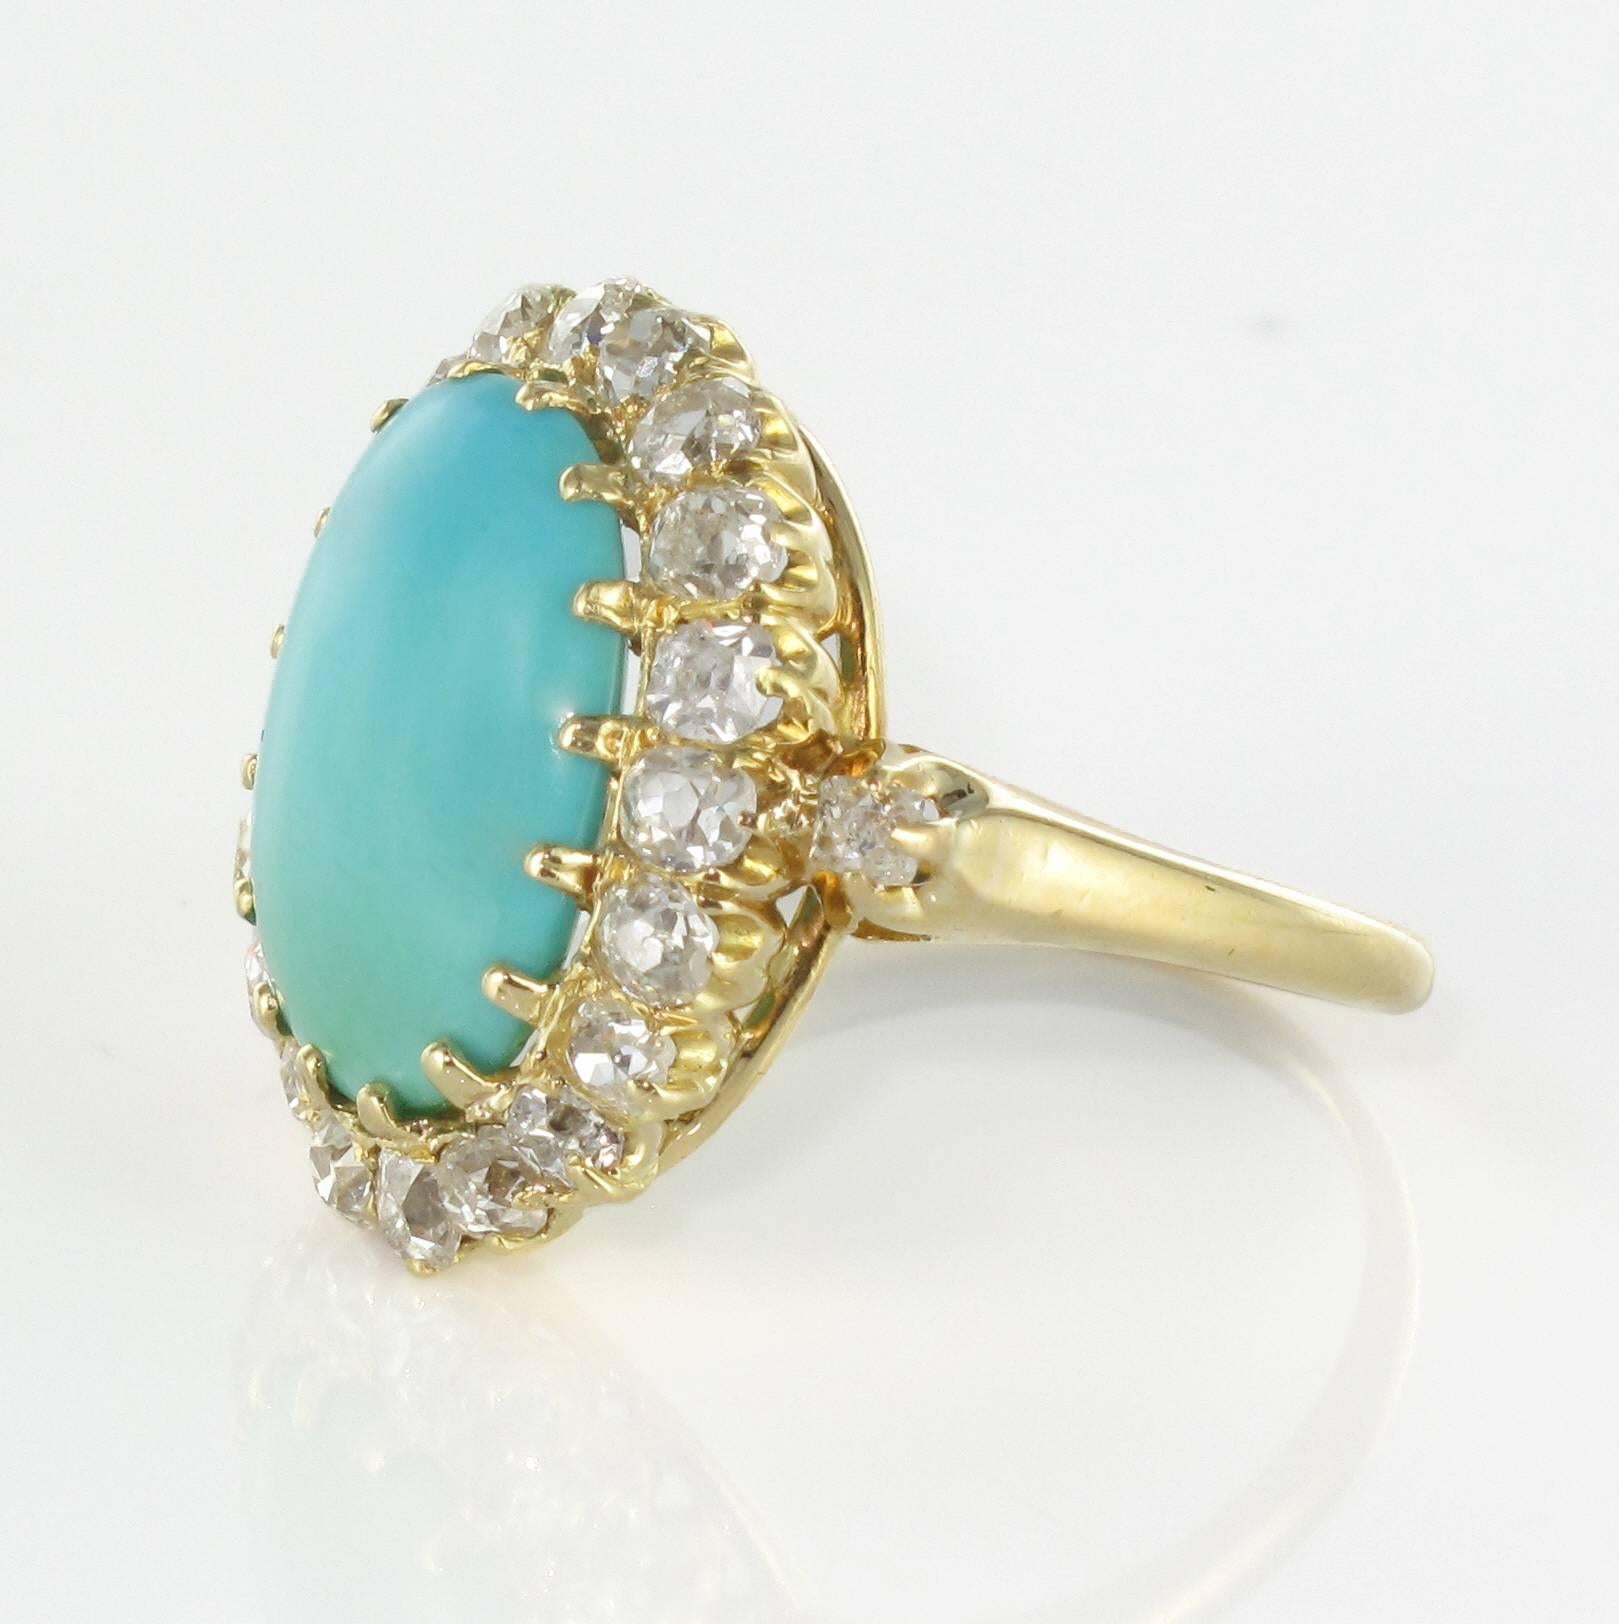 Ring in 18 carat yellow gold. 

This magnificent antique ring is claw set with a central turquoise cabochon surrounded by 20 perfectly matched antique cut diamonds. 
On each side, another antique cut diamond is also set into the beginning of the